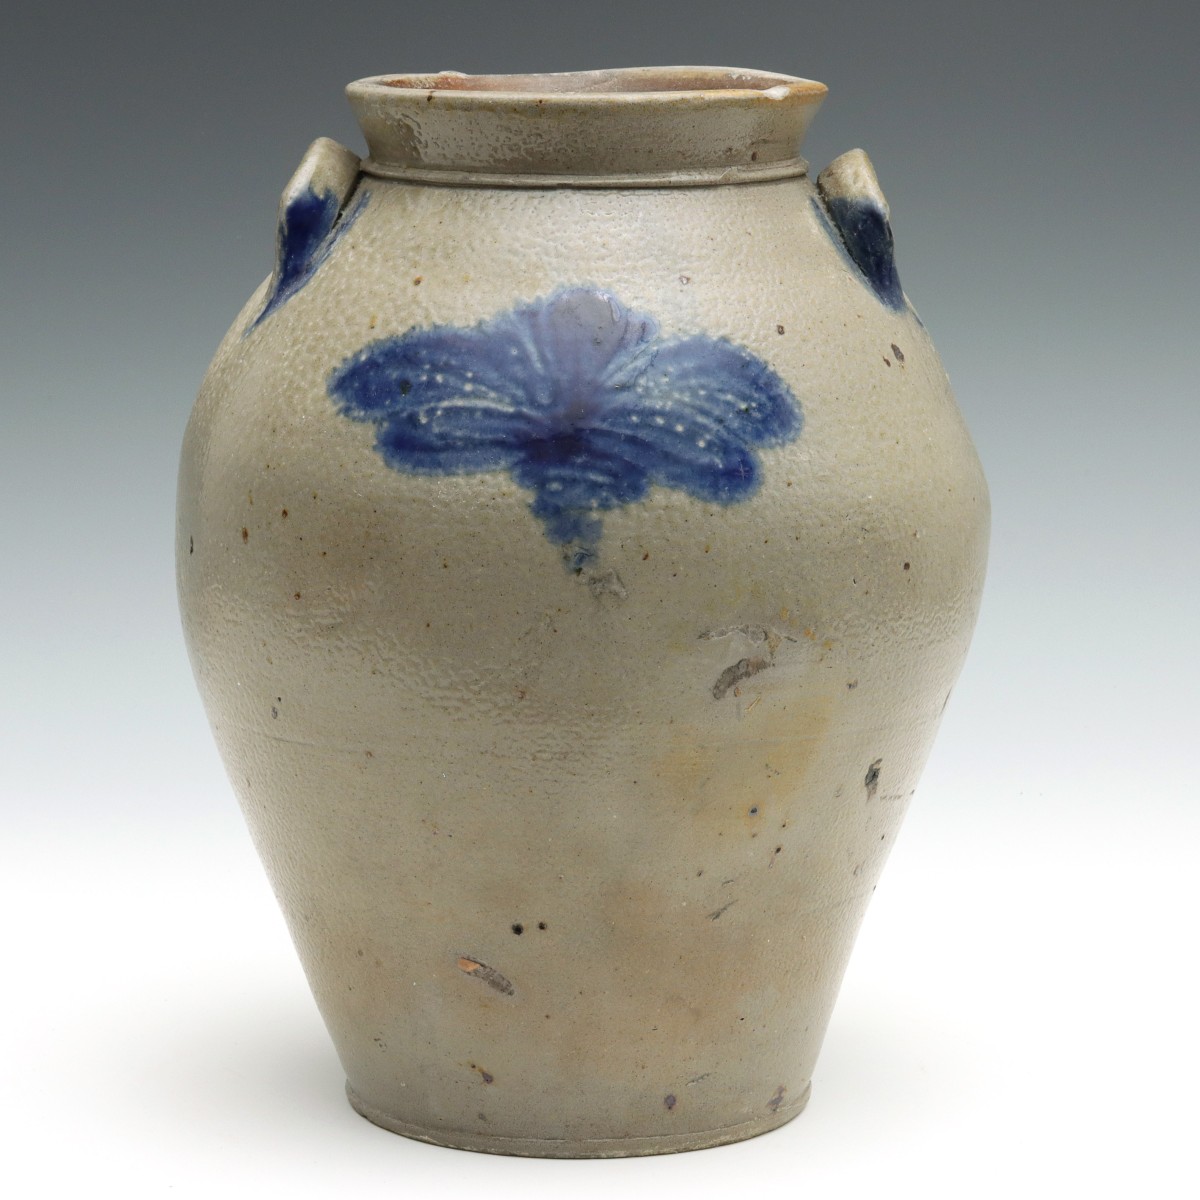 AN EARLY 19TH C. AMERICAN BLUE DECORATED STORAGE JAR